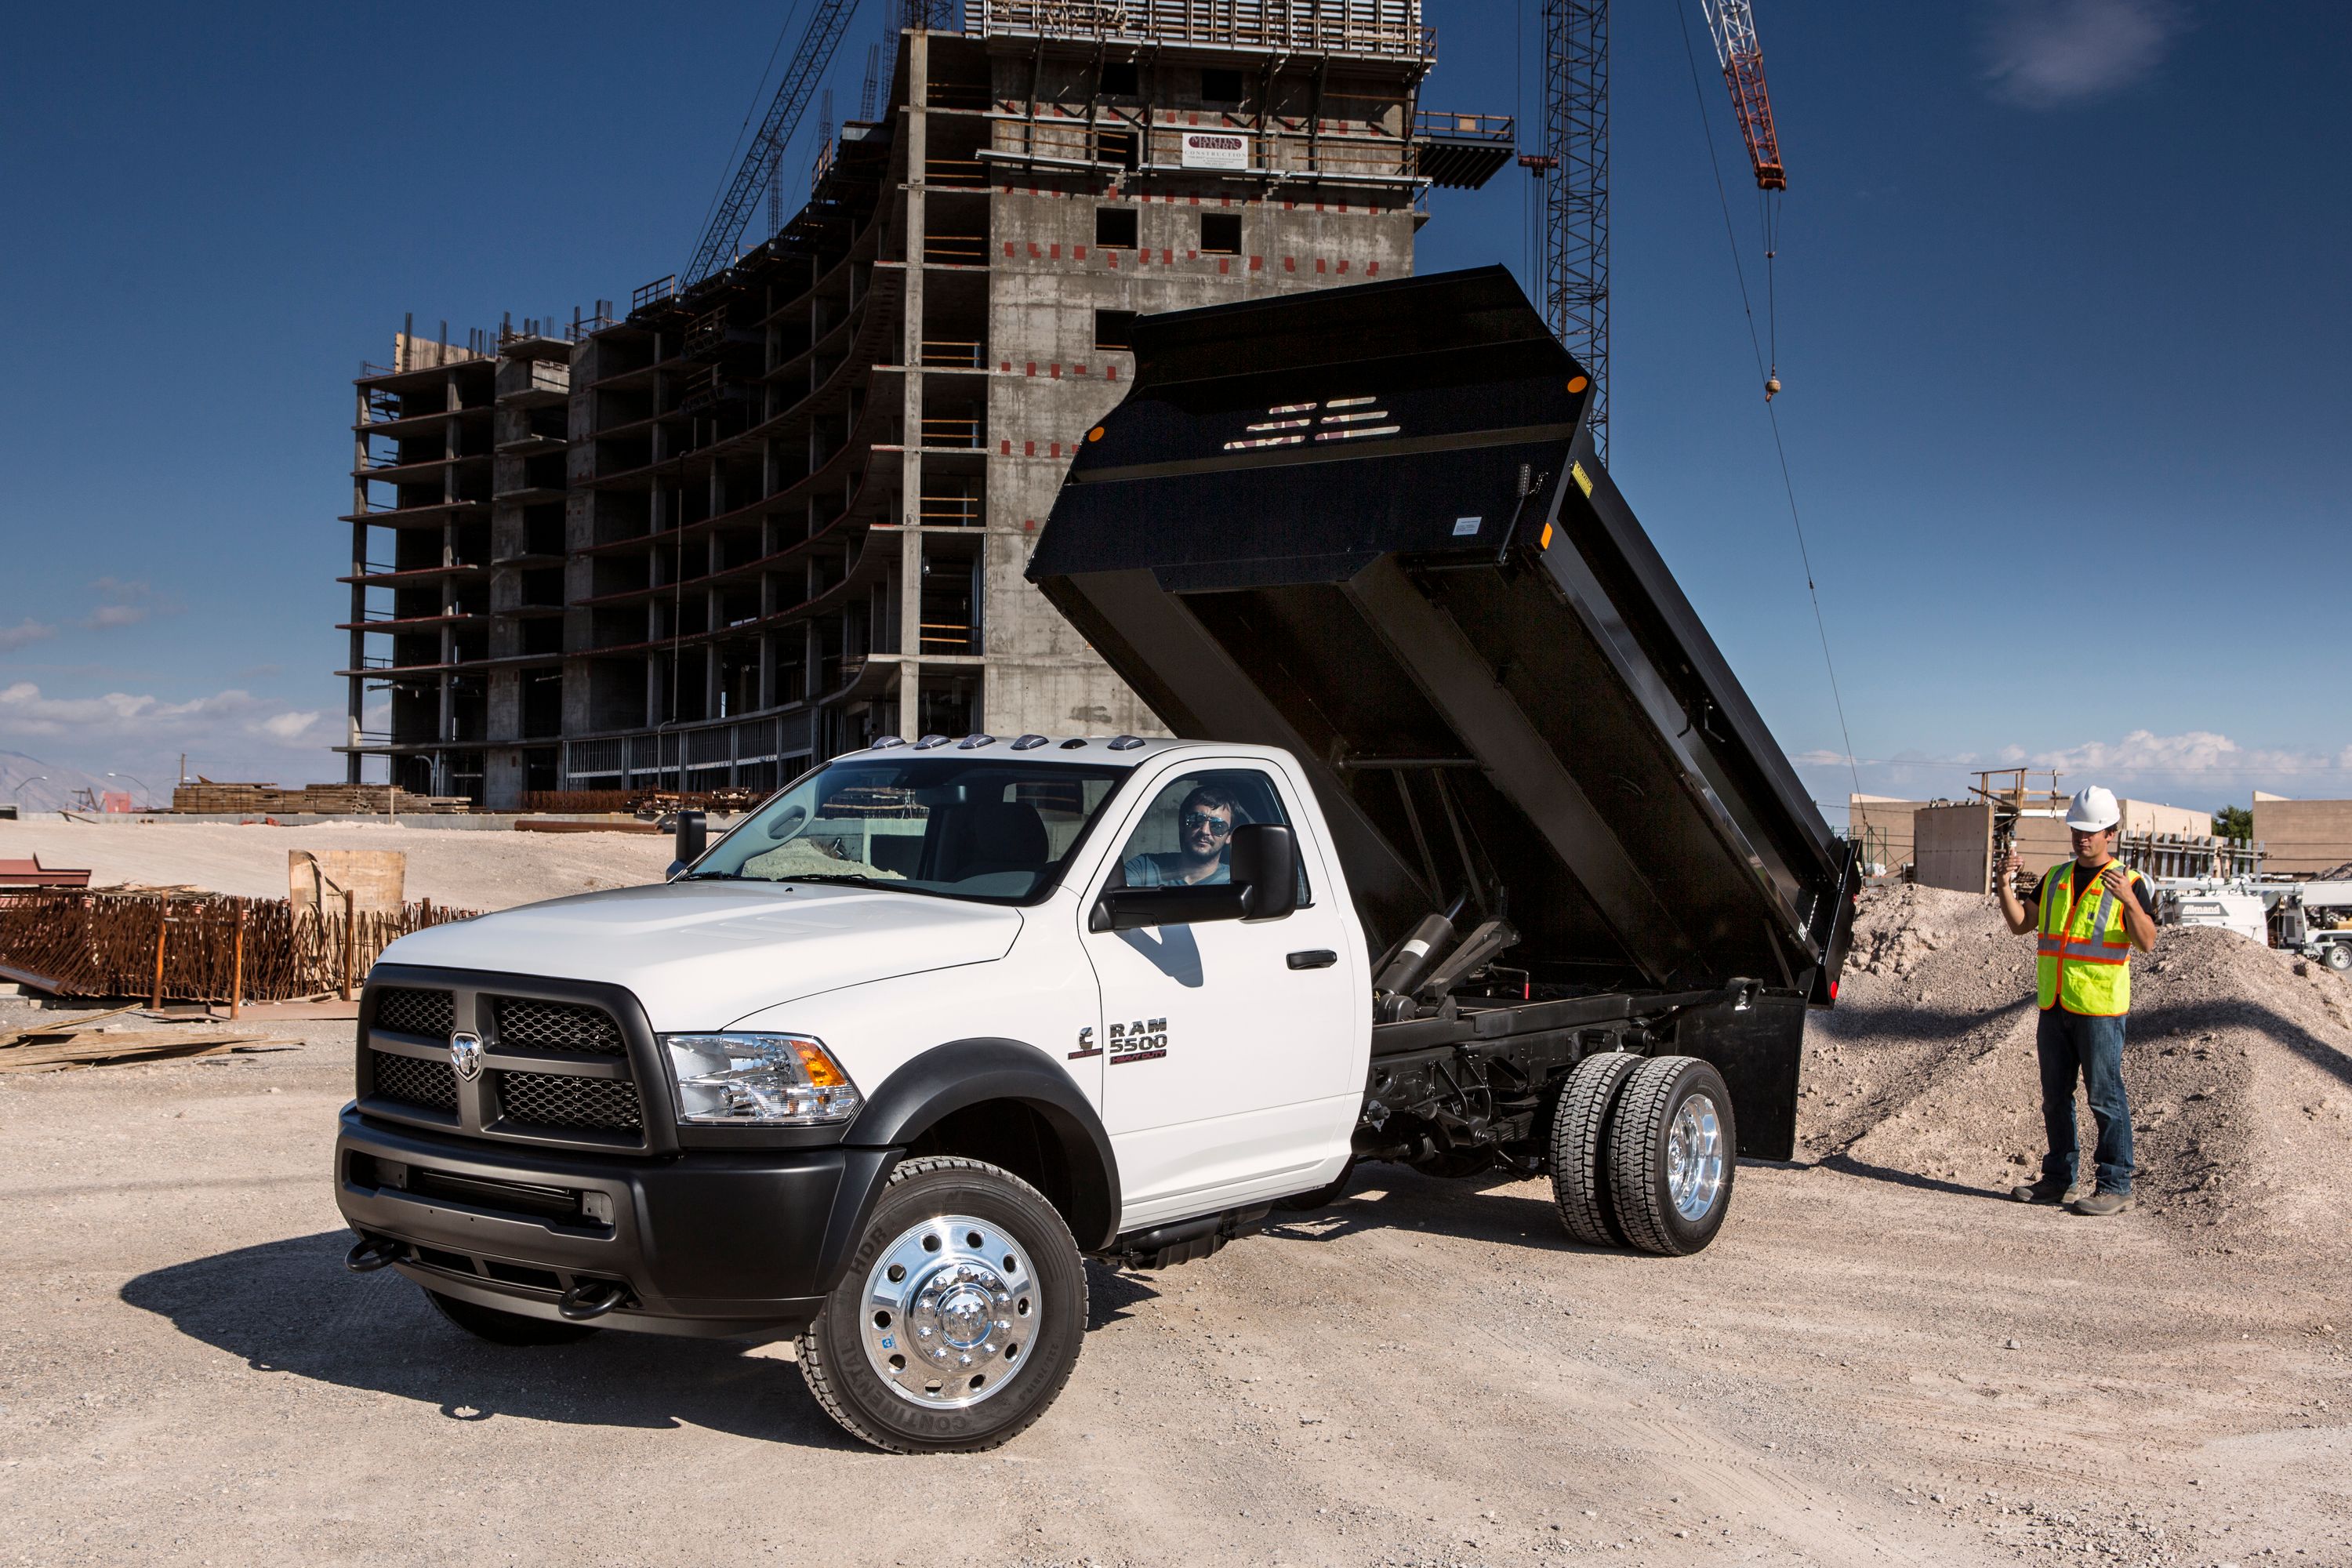 2014 Ram 4500/5500 Chassis Cab